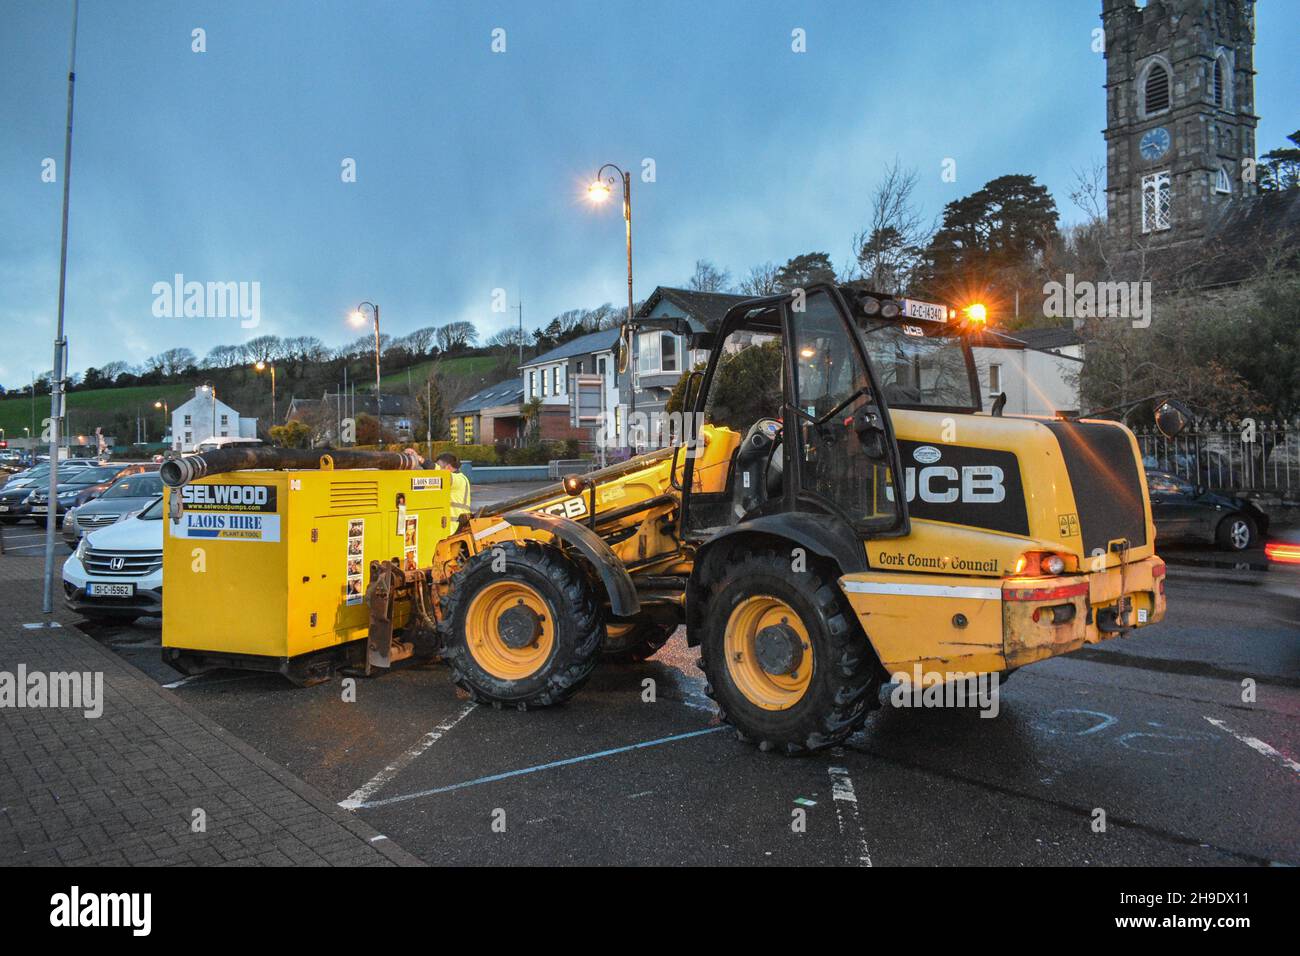 Bantry, West Cork, Ireland. 6th Dec, 2021. Locals in Bantry spent the evening preparing for Storm Barra. Pictured below, Cork County Council has installed two pumps in the square to prevent flooding. Credit: Karlis Dzjamko/Alamy Live News Stock Photo